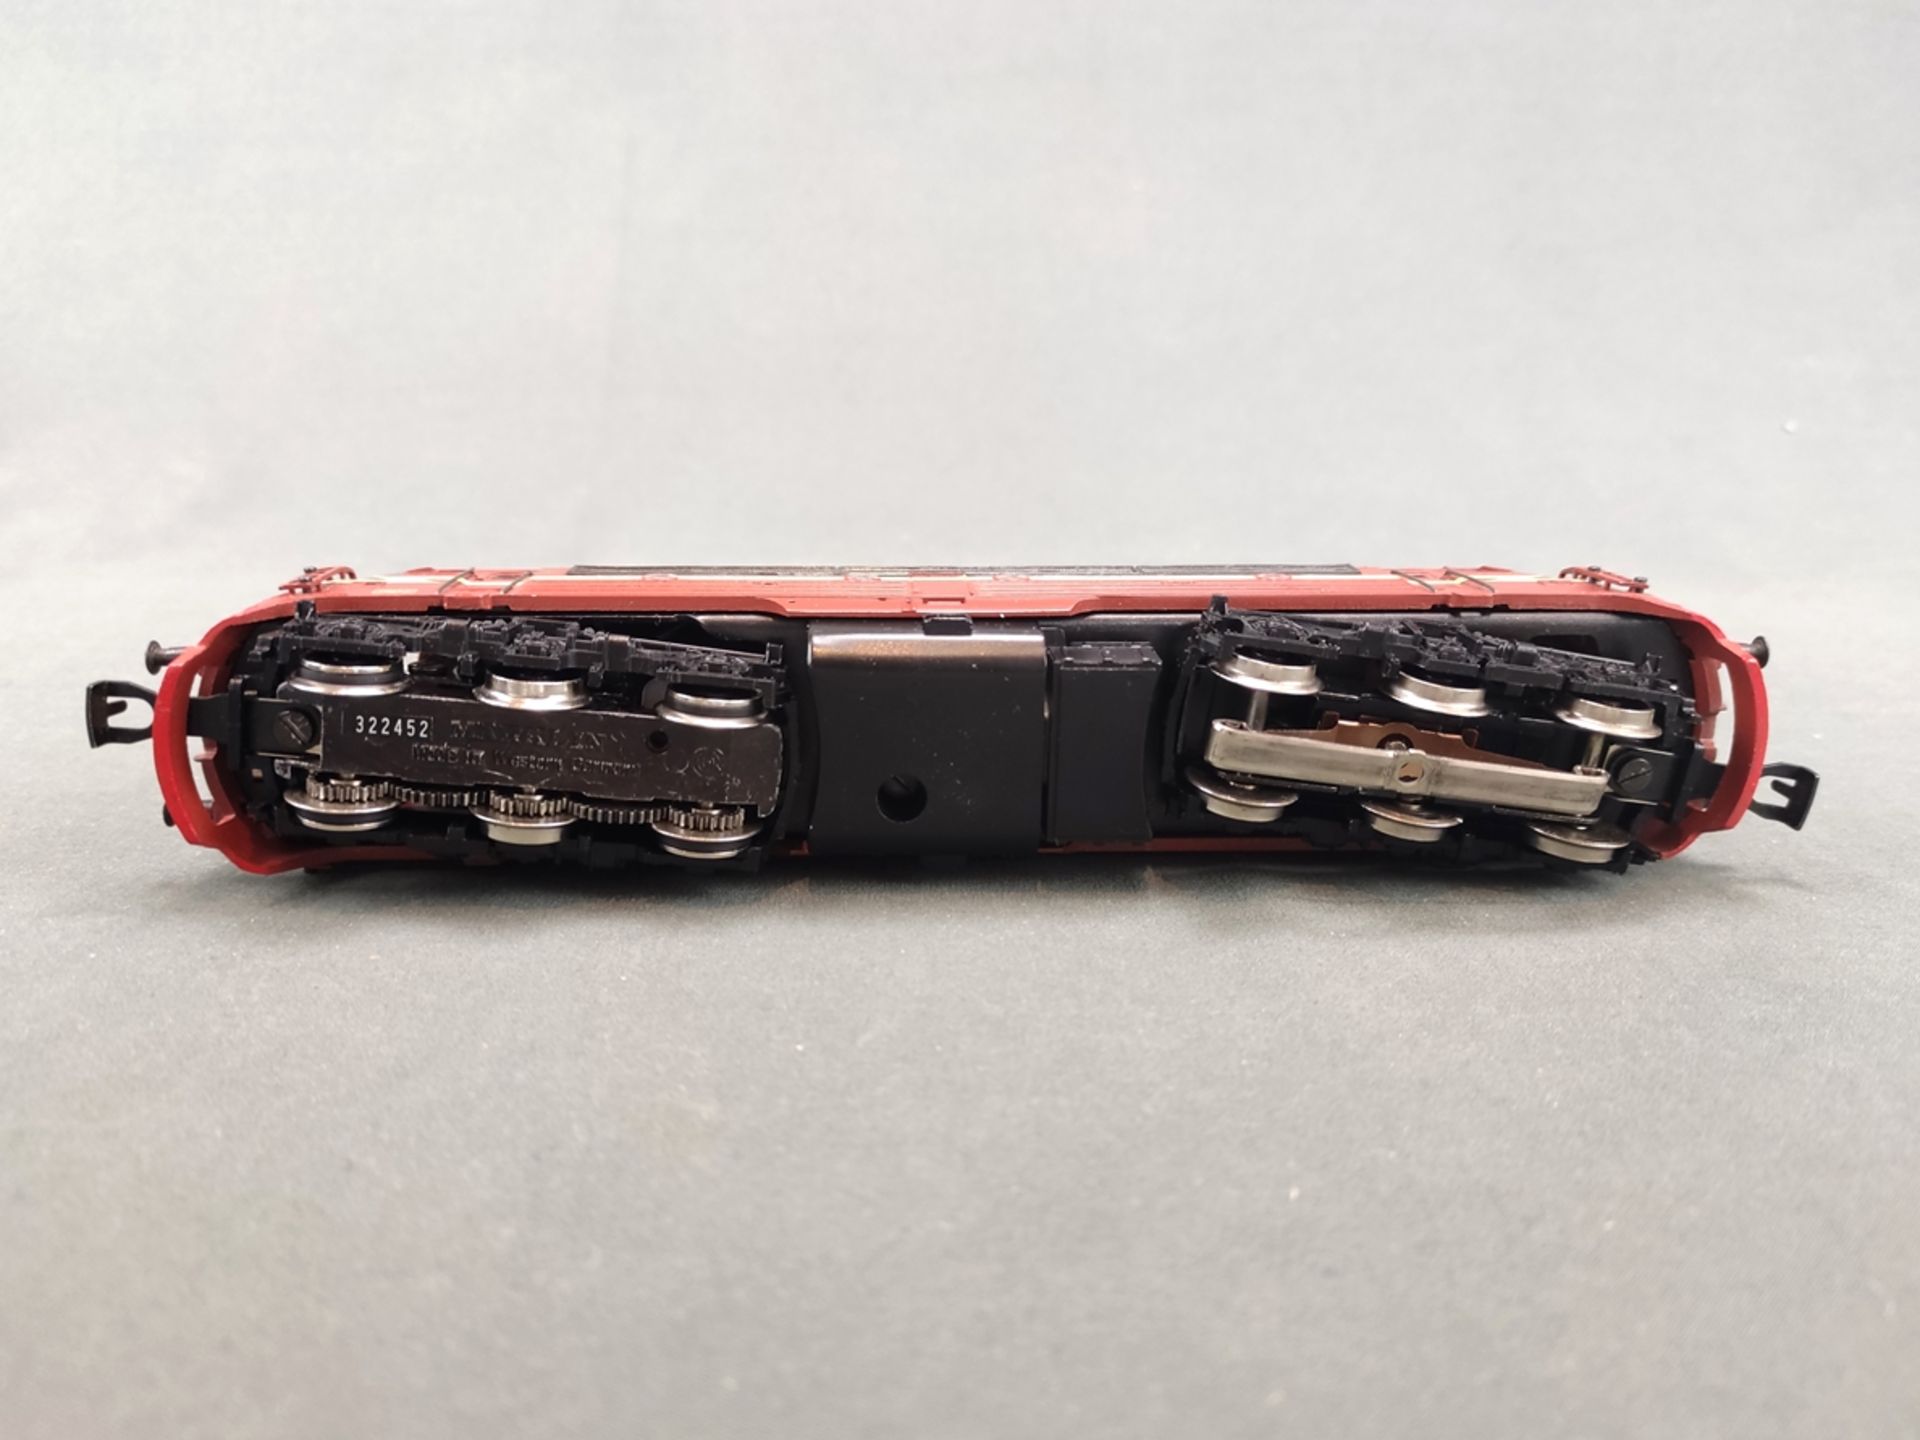 H0 Märklin 3143 Diesel locomotive, function not tested, in original box, from collection - Image 3 of 3